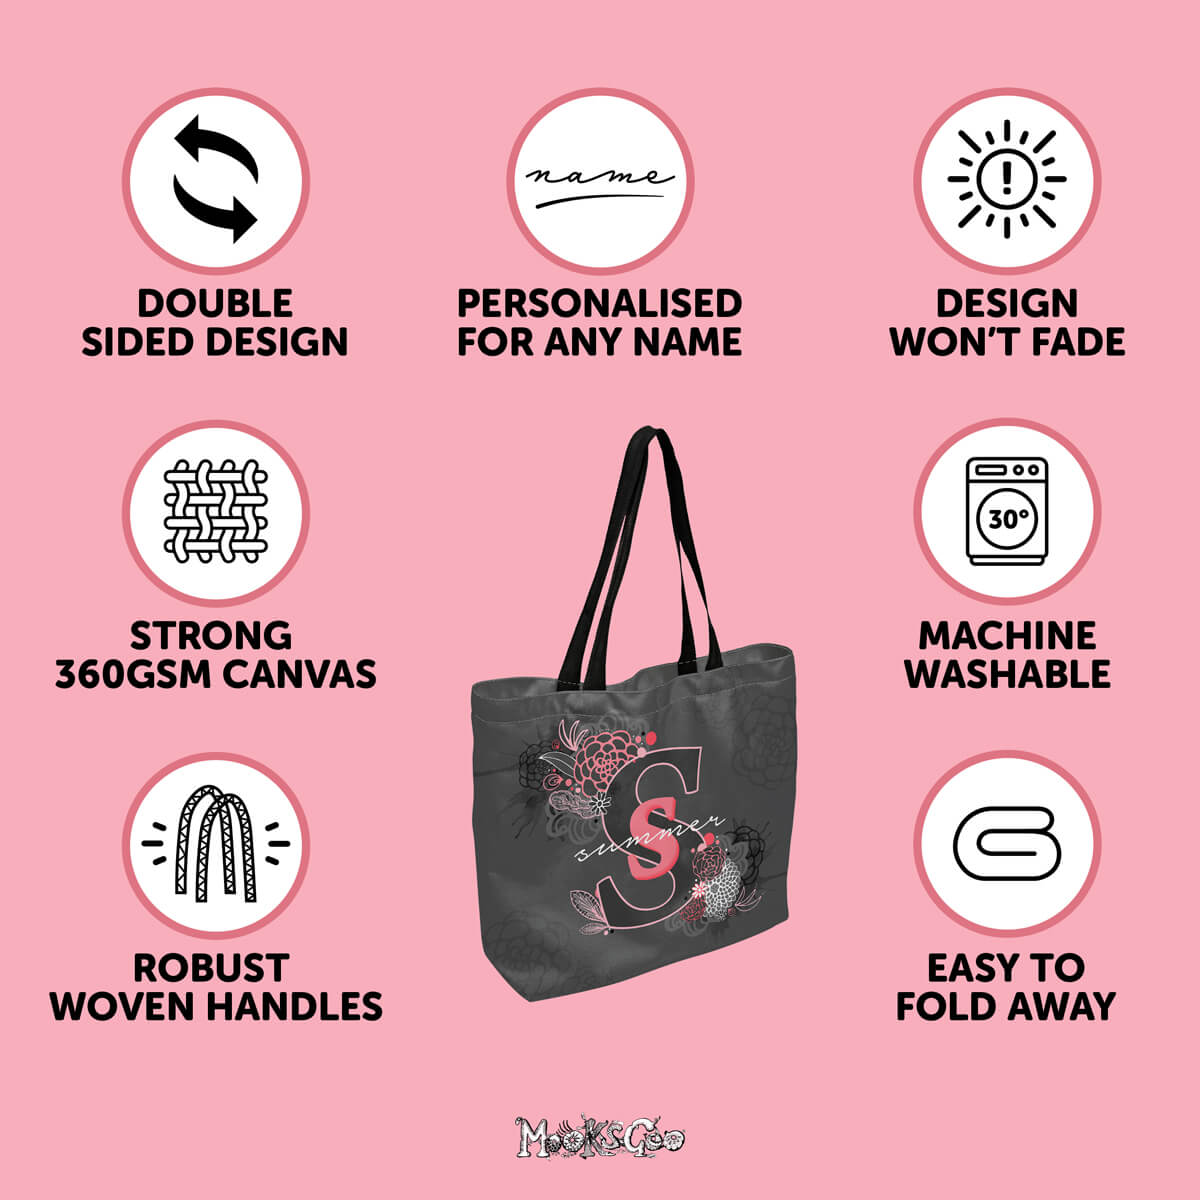 Benefits of a personaslised tote bag designed by MooksGoo, such as double sided design, strong 360gsm canvas fabric, robust strong handles, design won't fade, machine washable, easy to fold away, and personalised with any name.